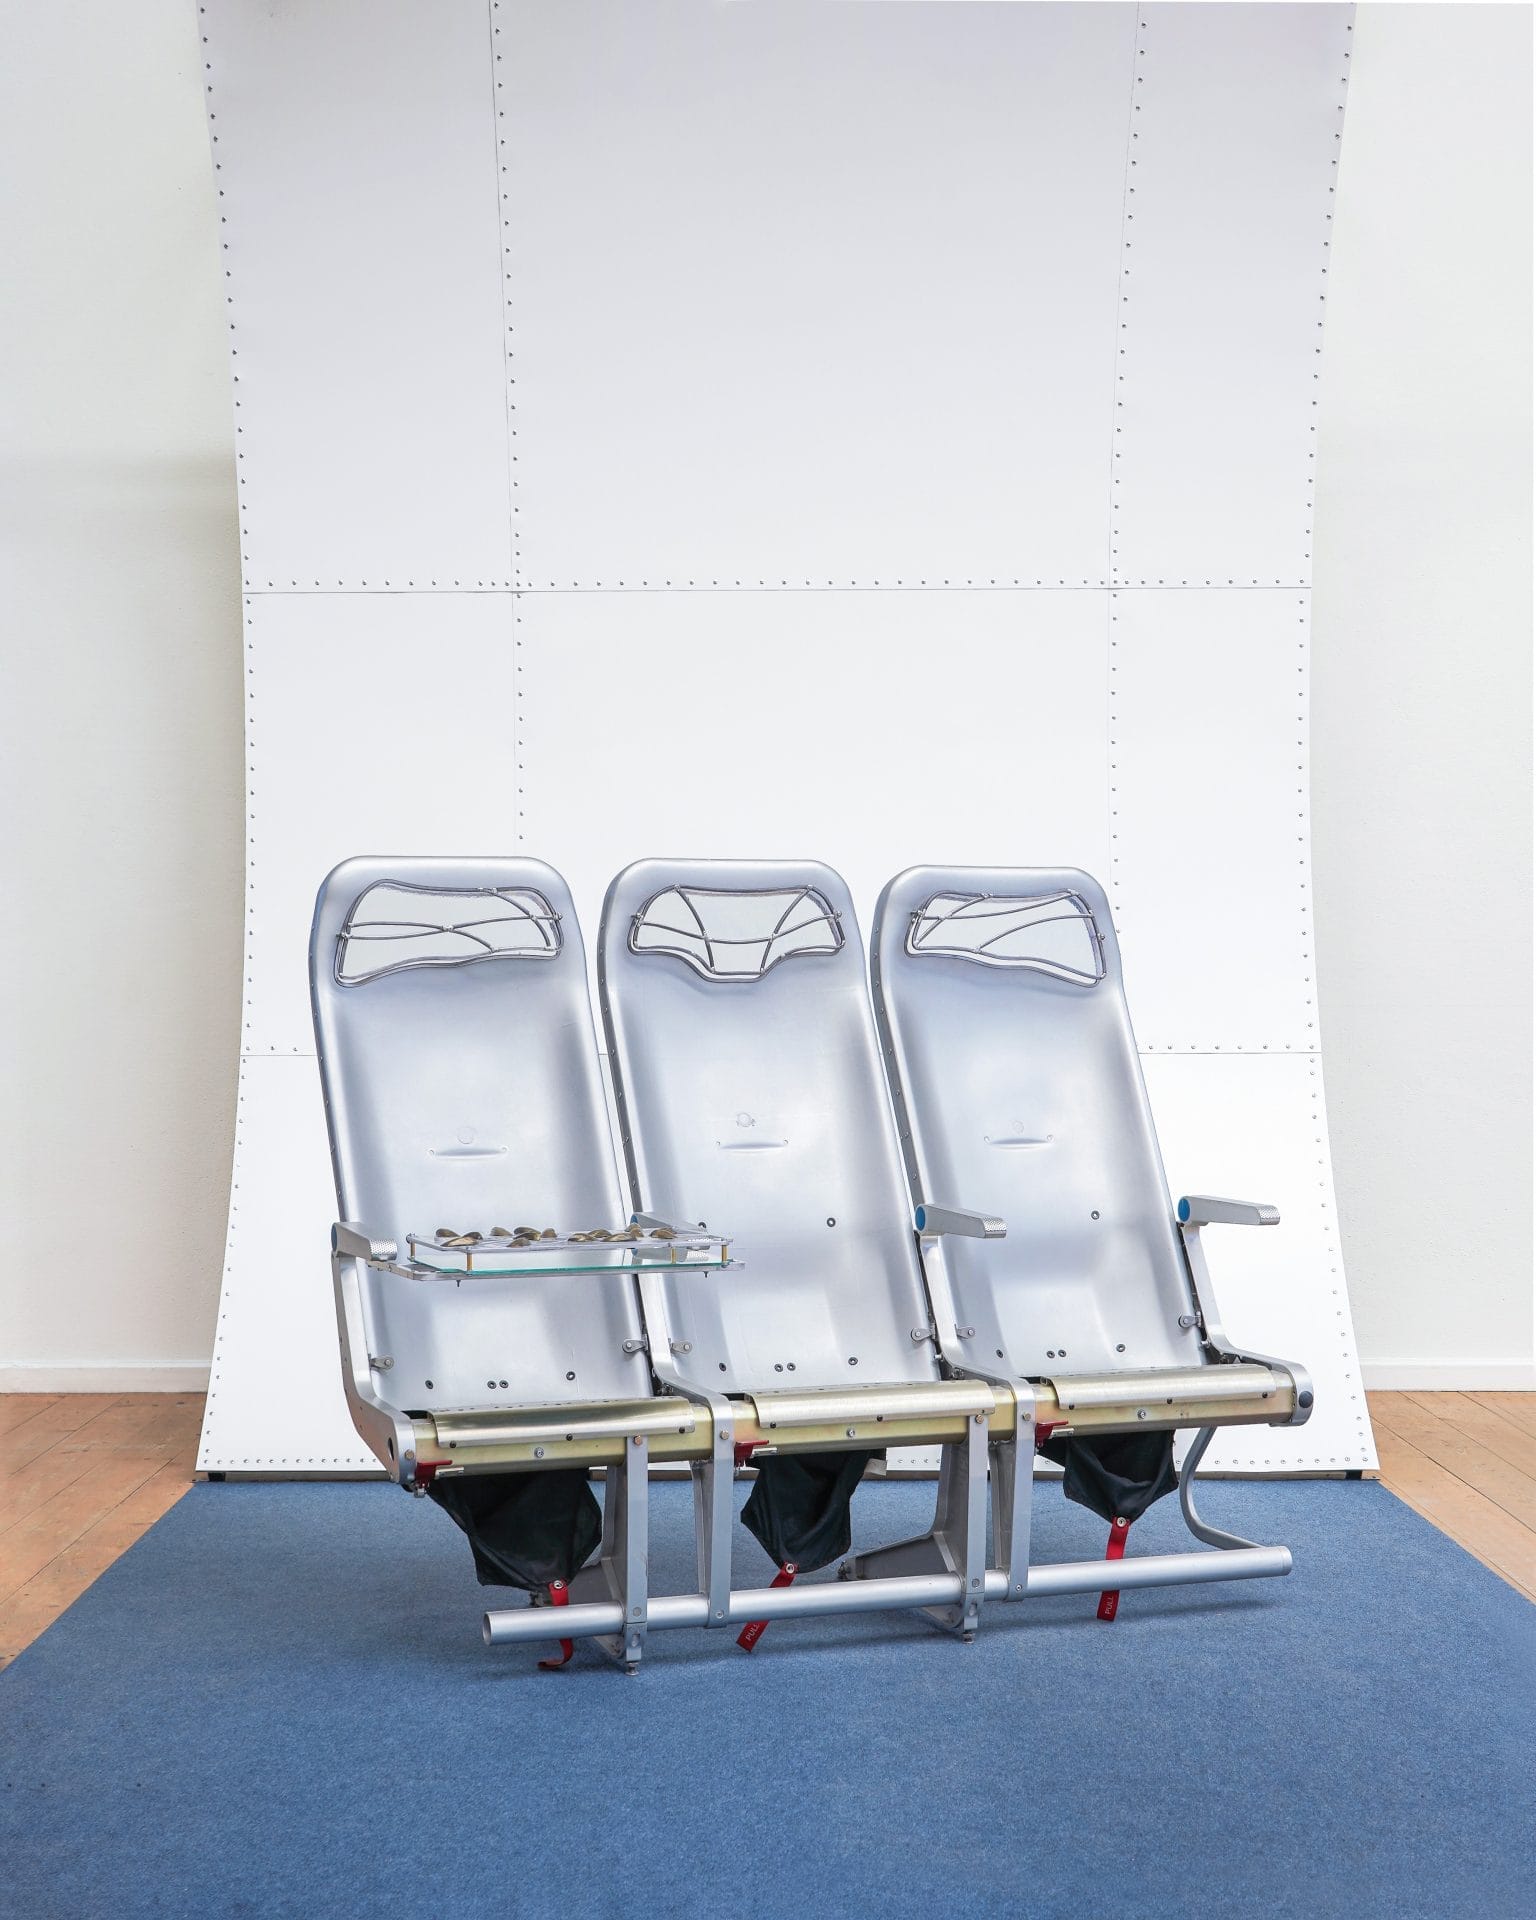 Ju Young Kim, AEROPLASTICS, Academy of Fine Arts in Munich, Courtesy by the artist, Photographed by Younsik Kim